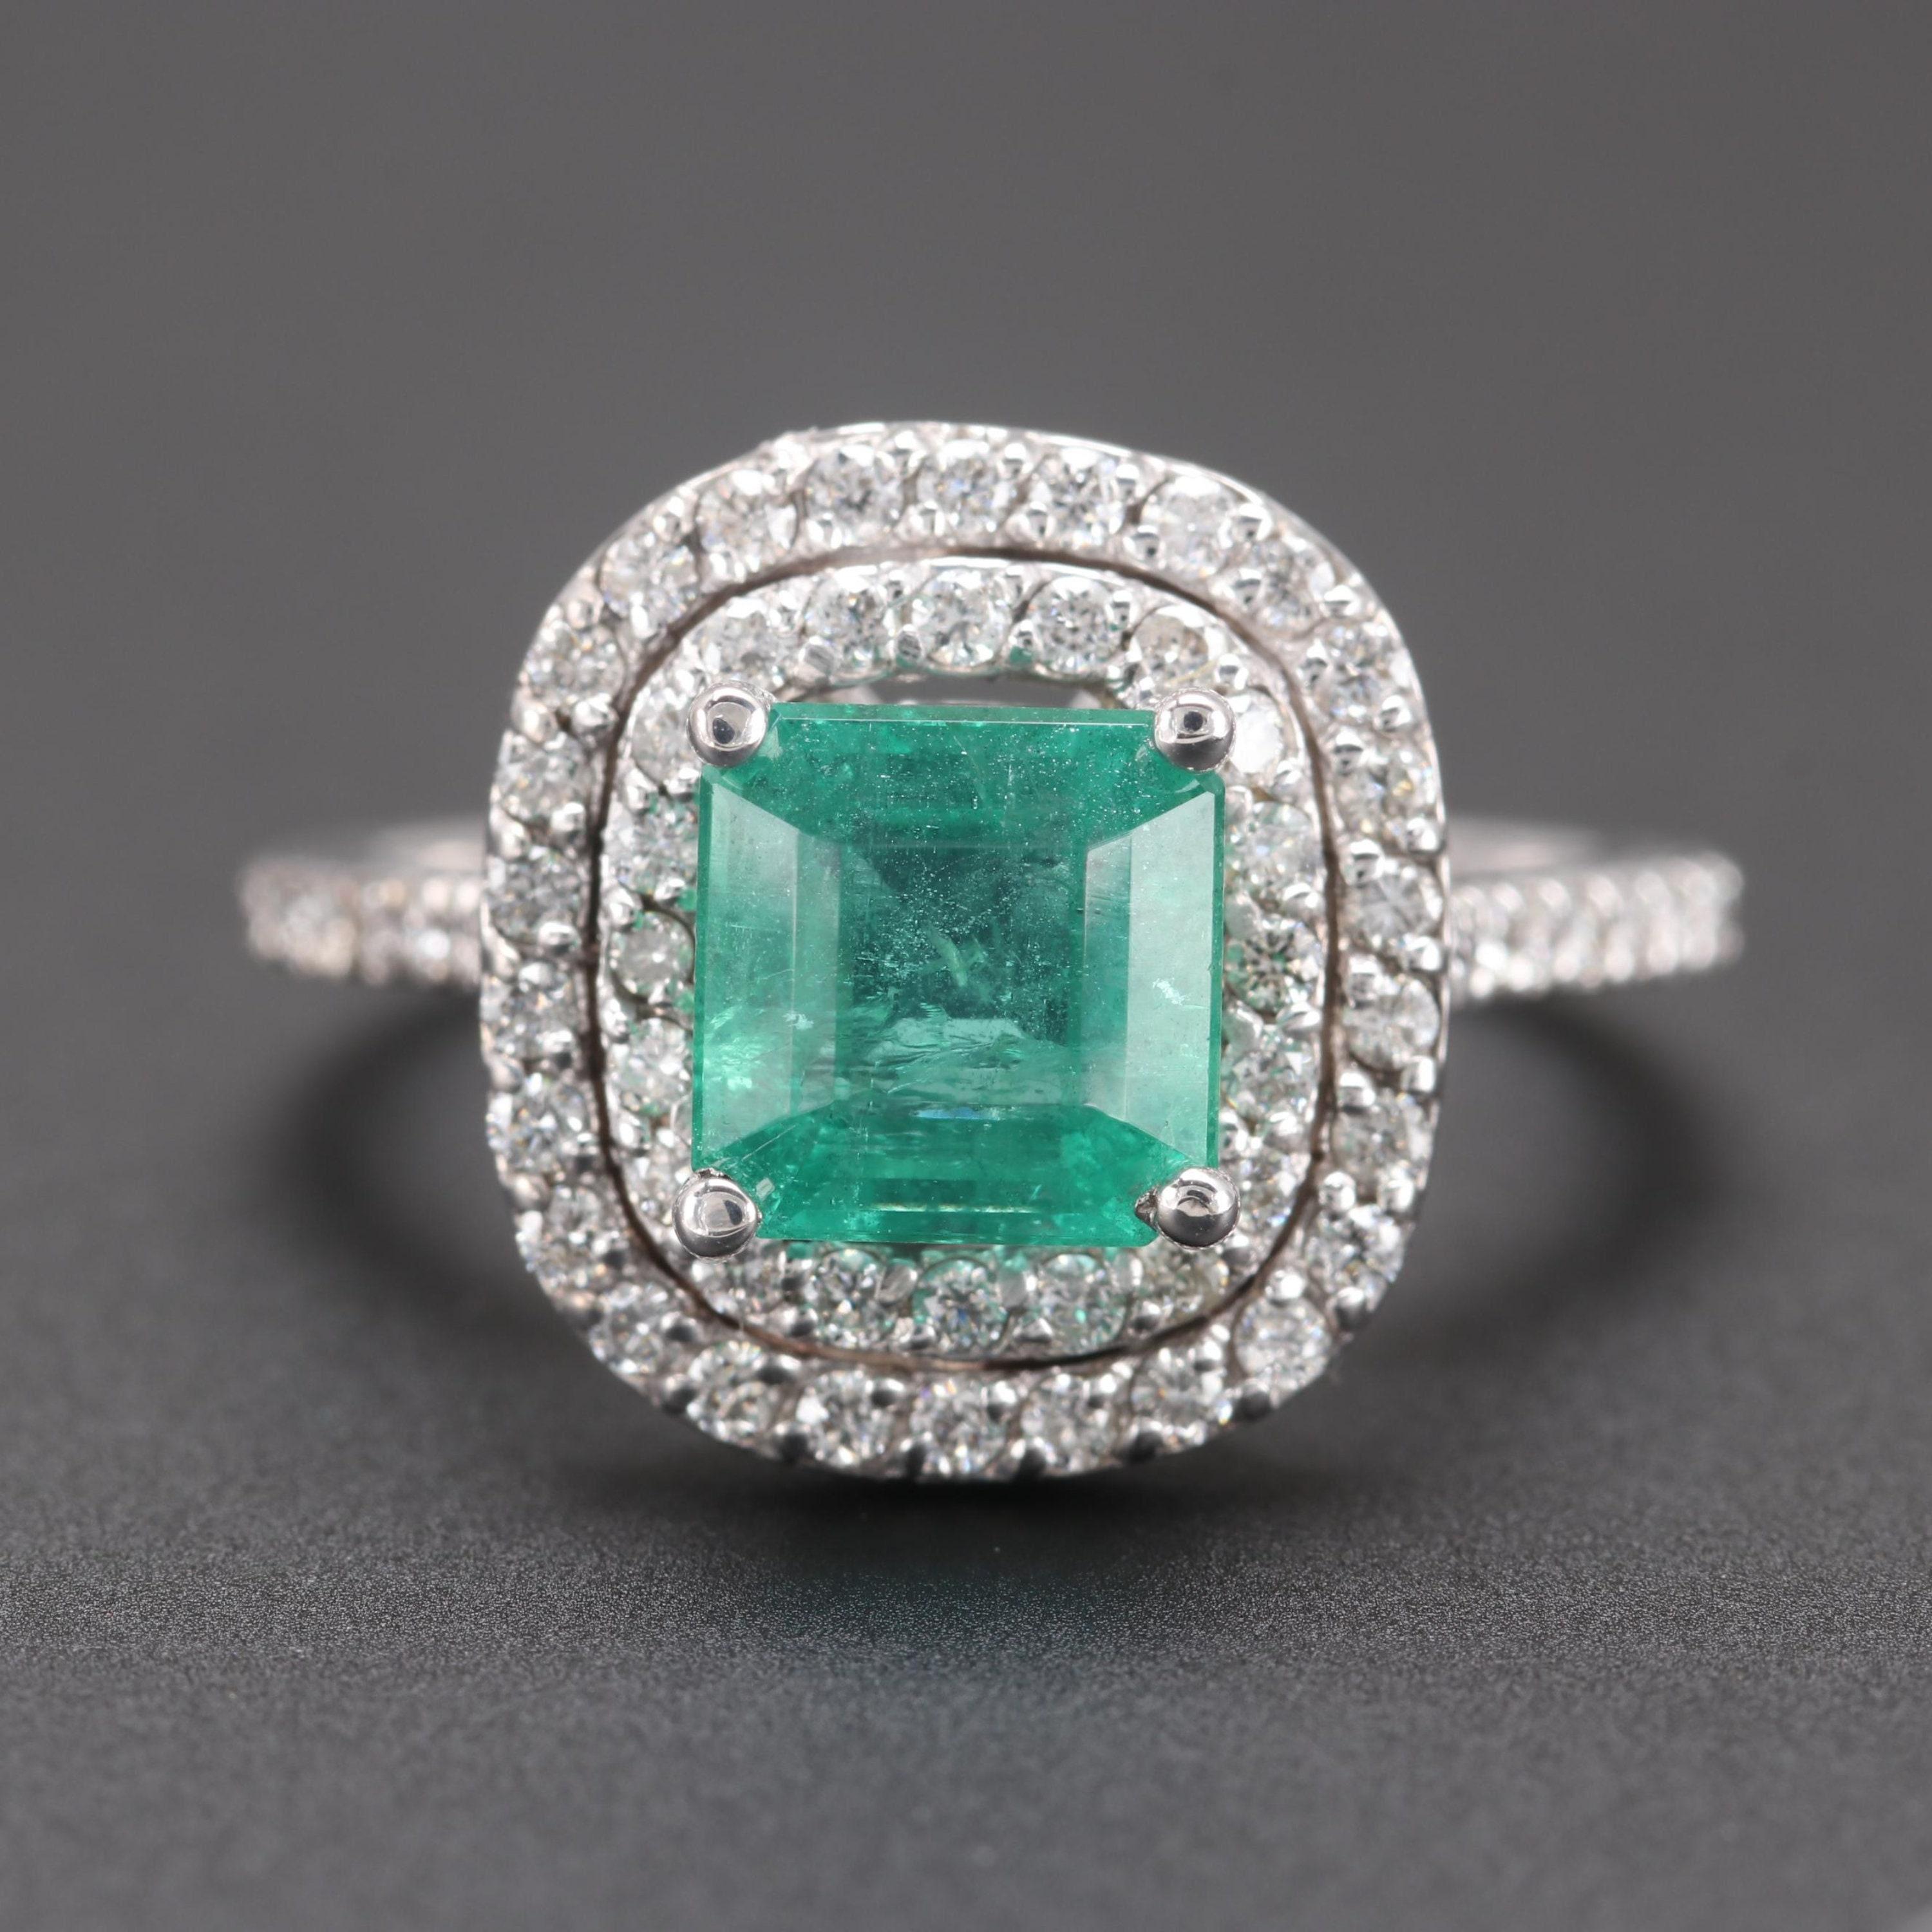 For Sale:  Art Deco Natural Emerald Diamond Engagement Ring Set in 18K Gold, Cocktail Ring 2